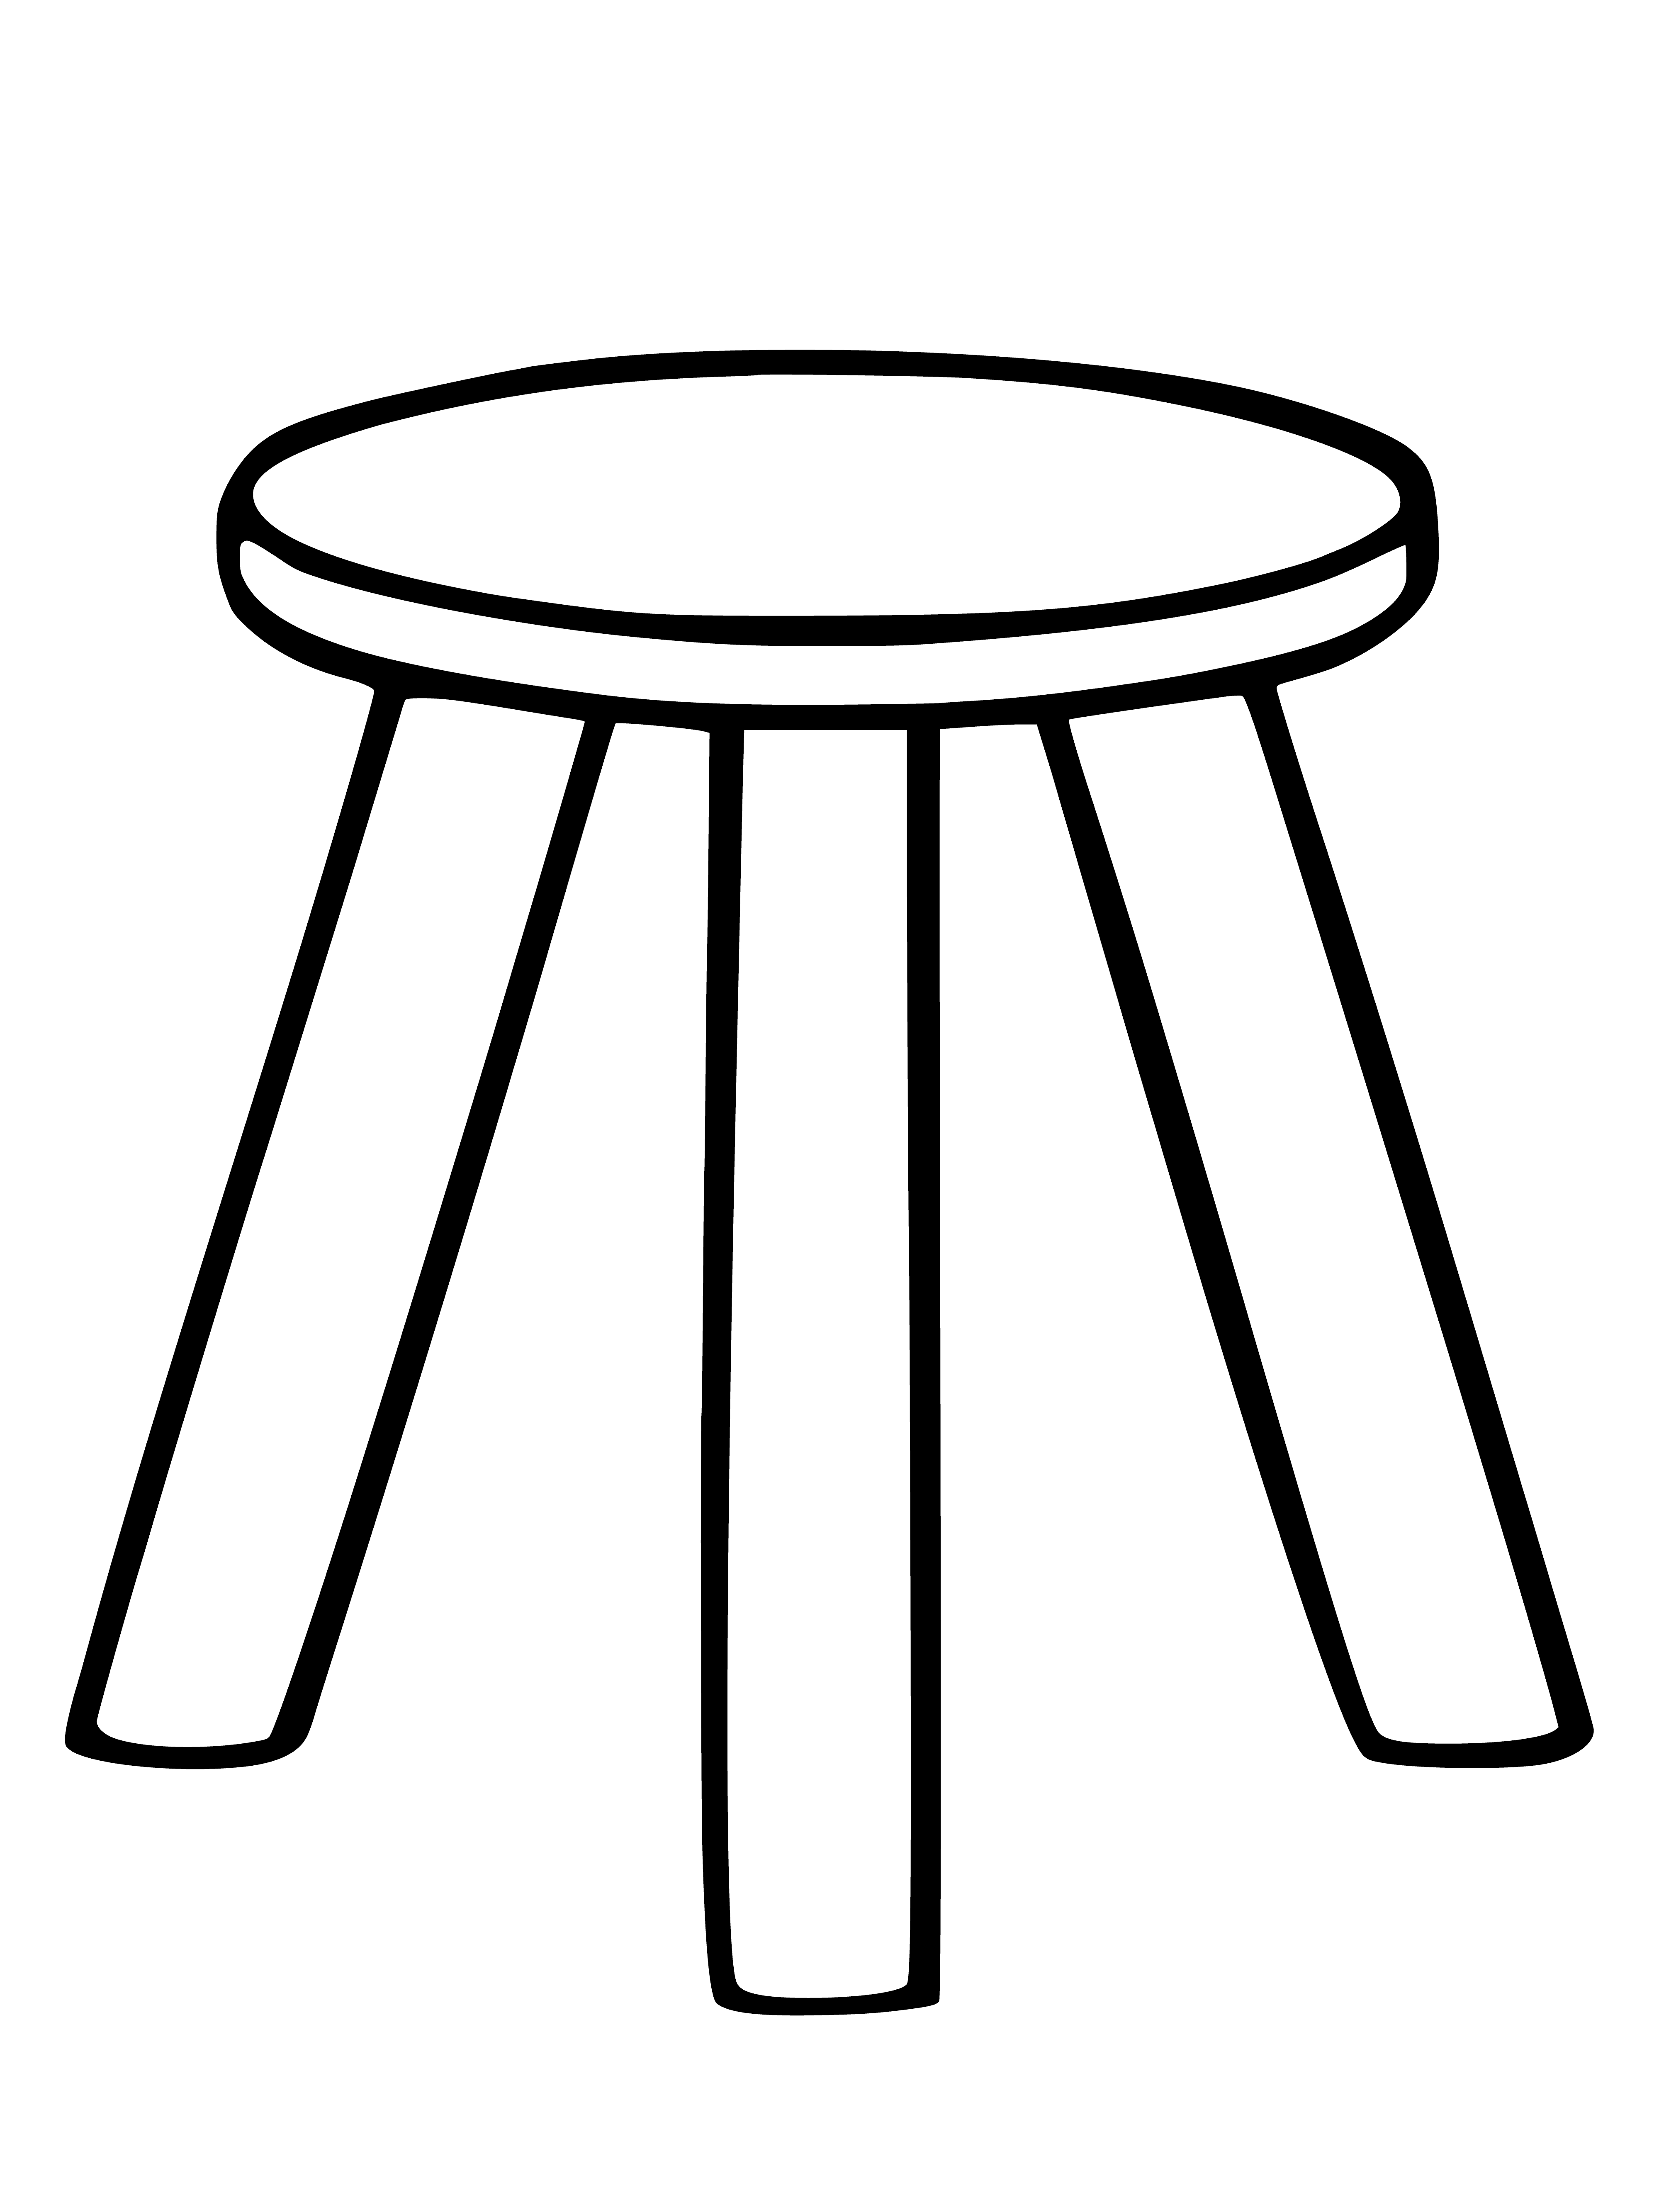 coloring page: Coloring page has stool w/ wooden legs & round seat, upholstered in brown fabric & stained a dark brown.